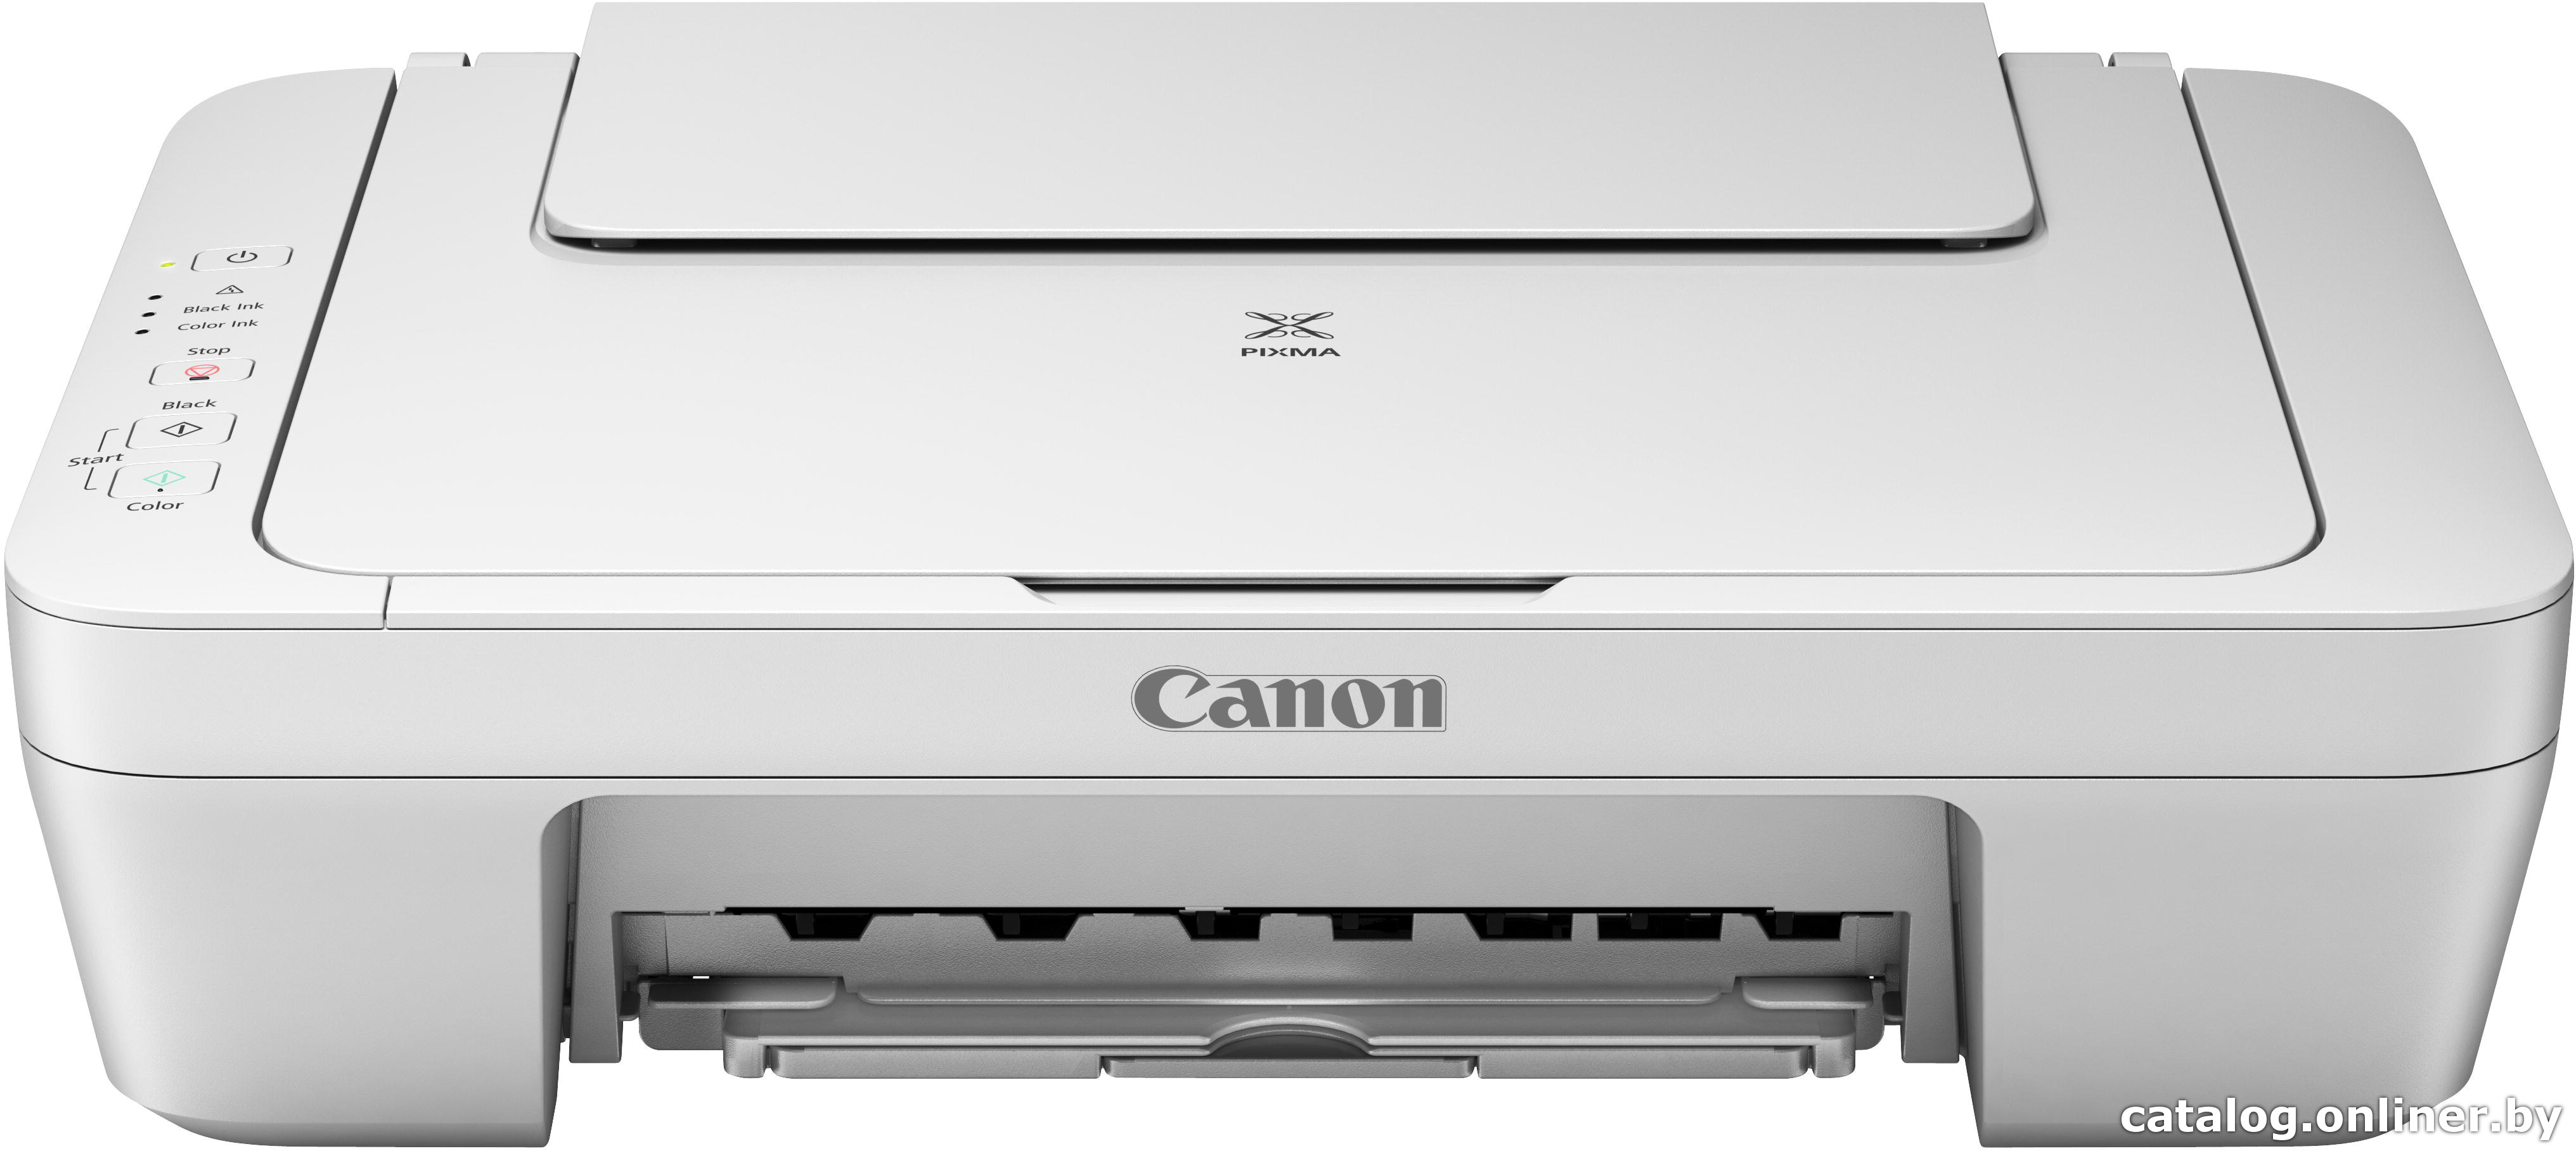 Canon MG2540 Scanner Driver Mac Sierra 10.12 How to Download and Install - Featured